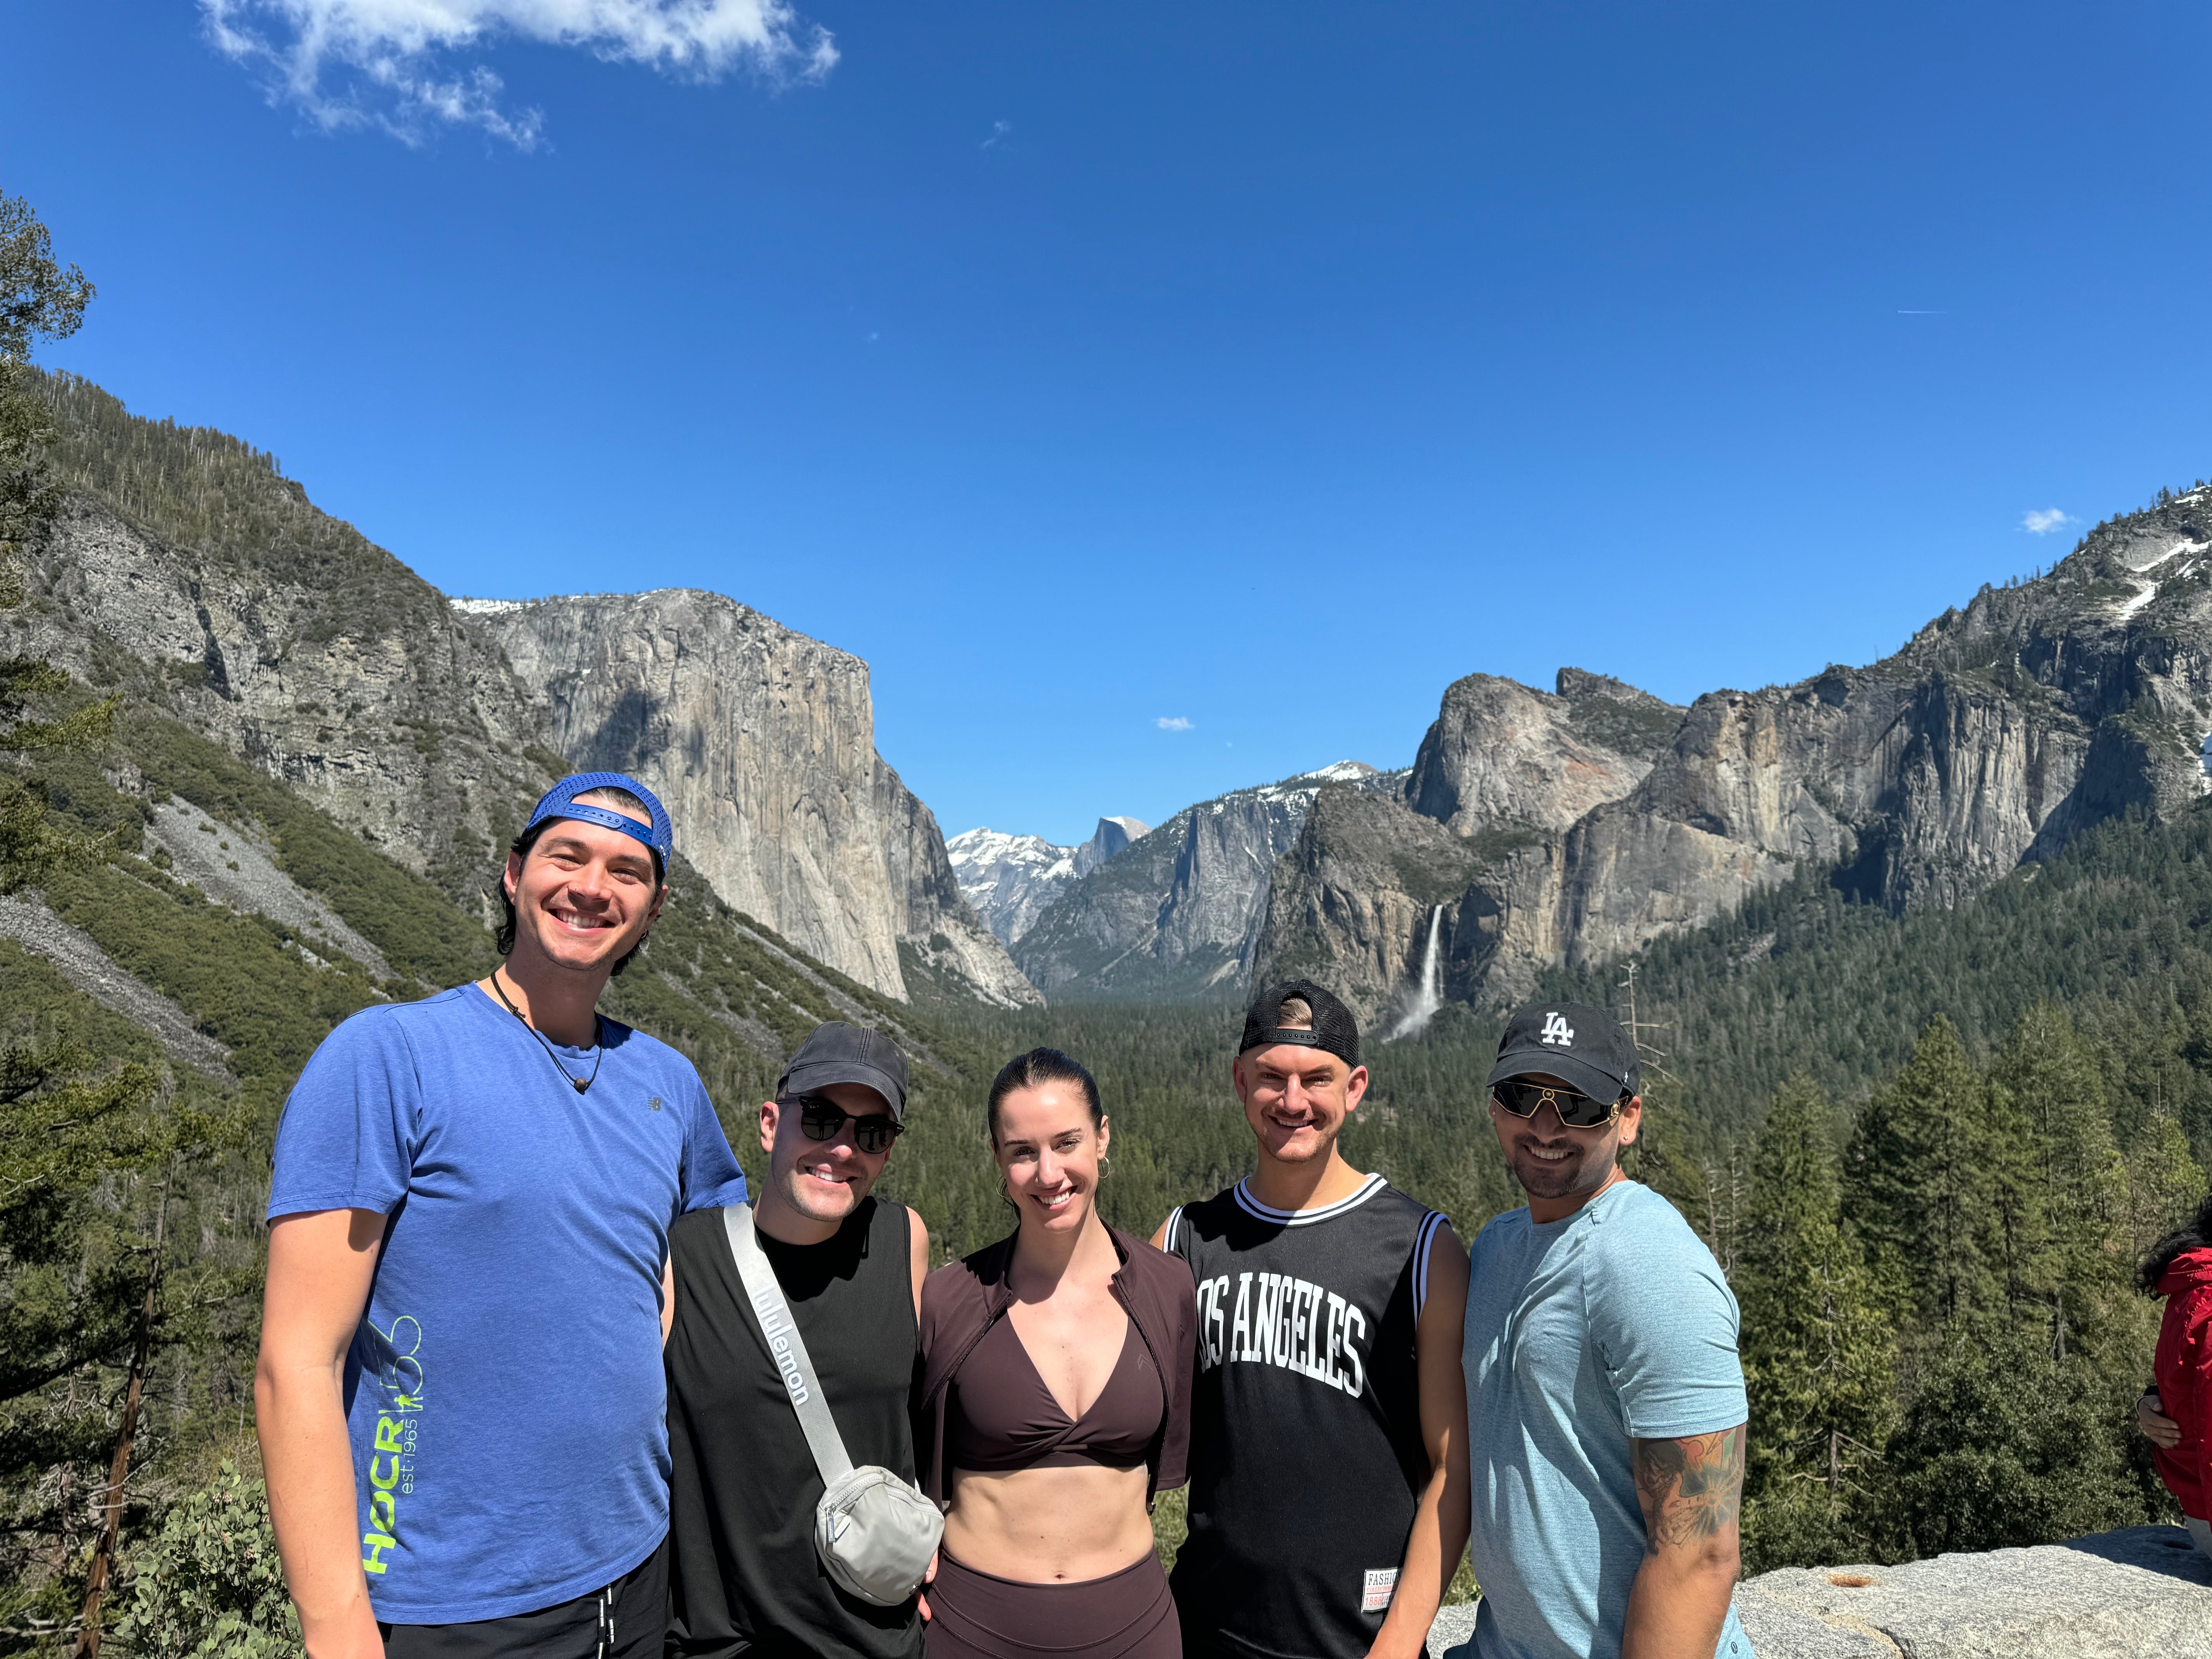 A photo of me and my four friends in front of a beautiful view of Yosemite